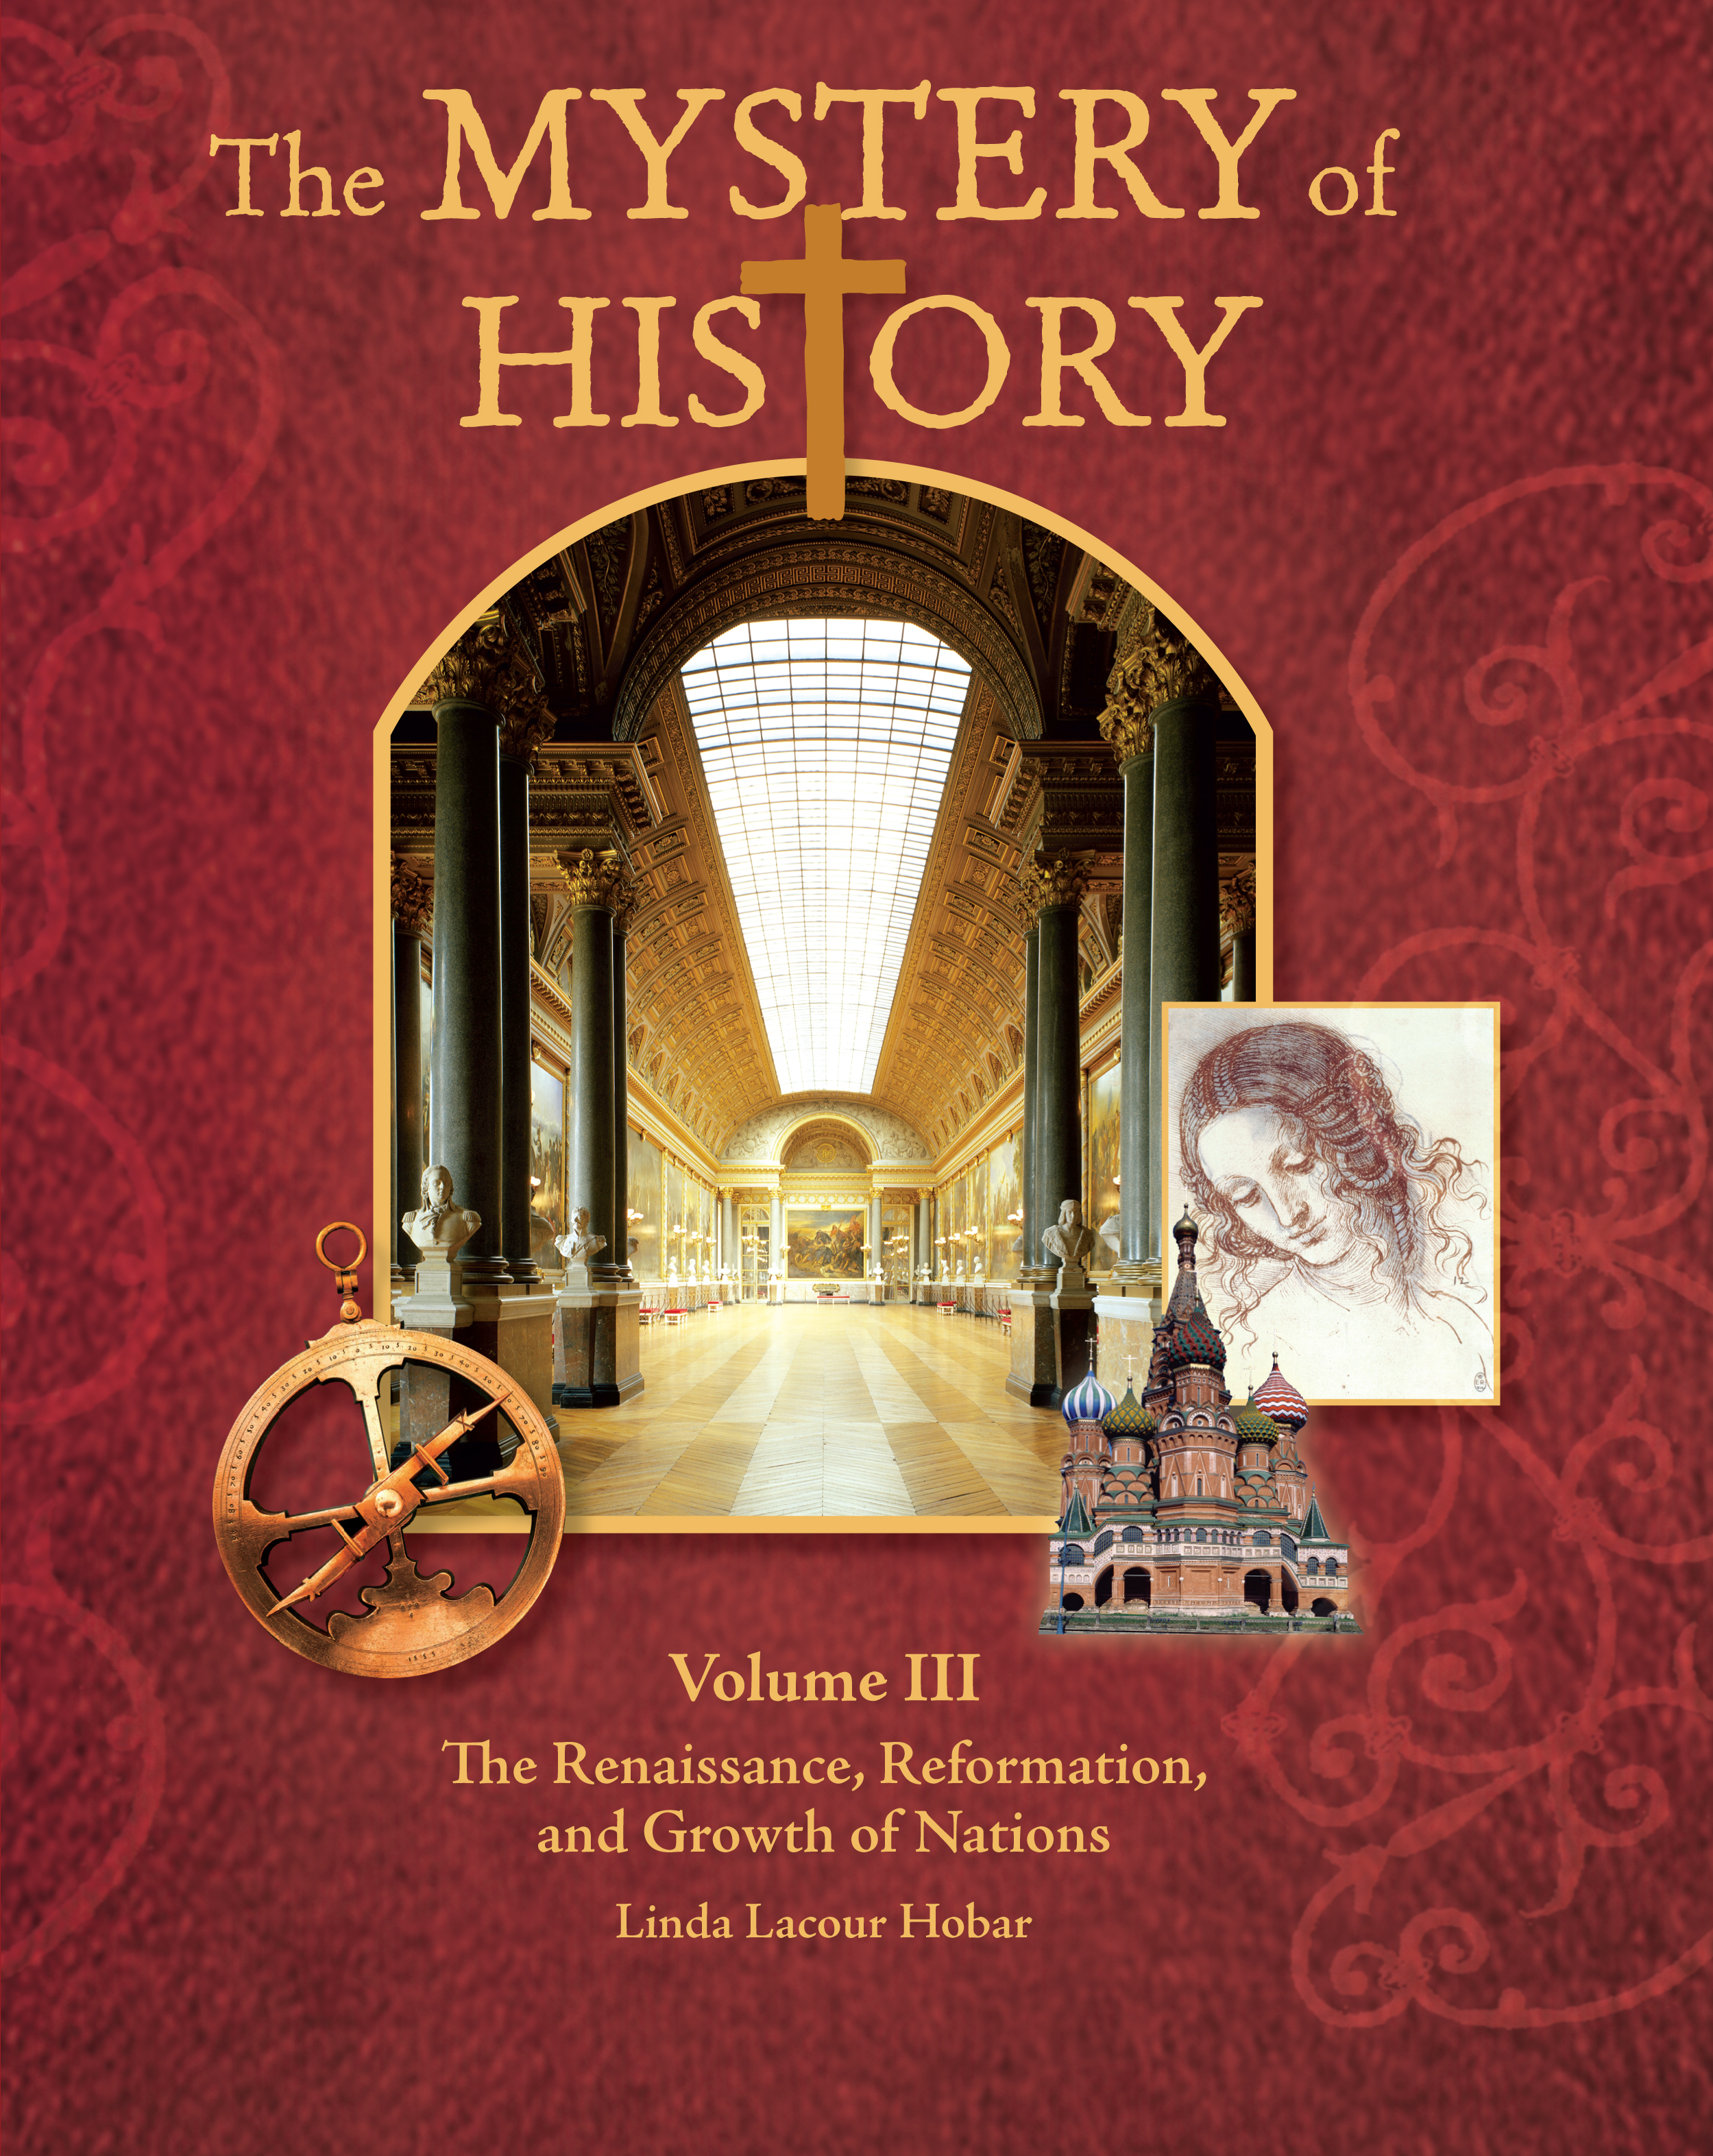 The Mystery of History Volume III Student Reader